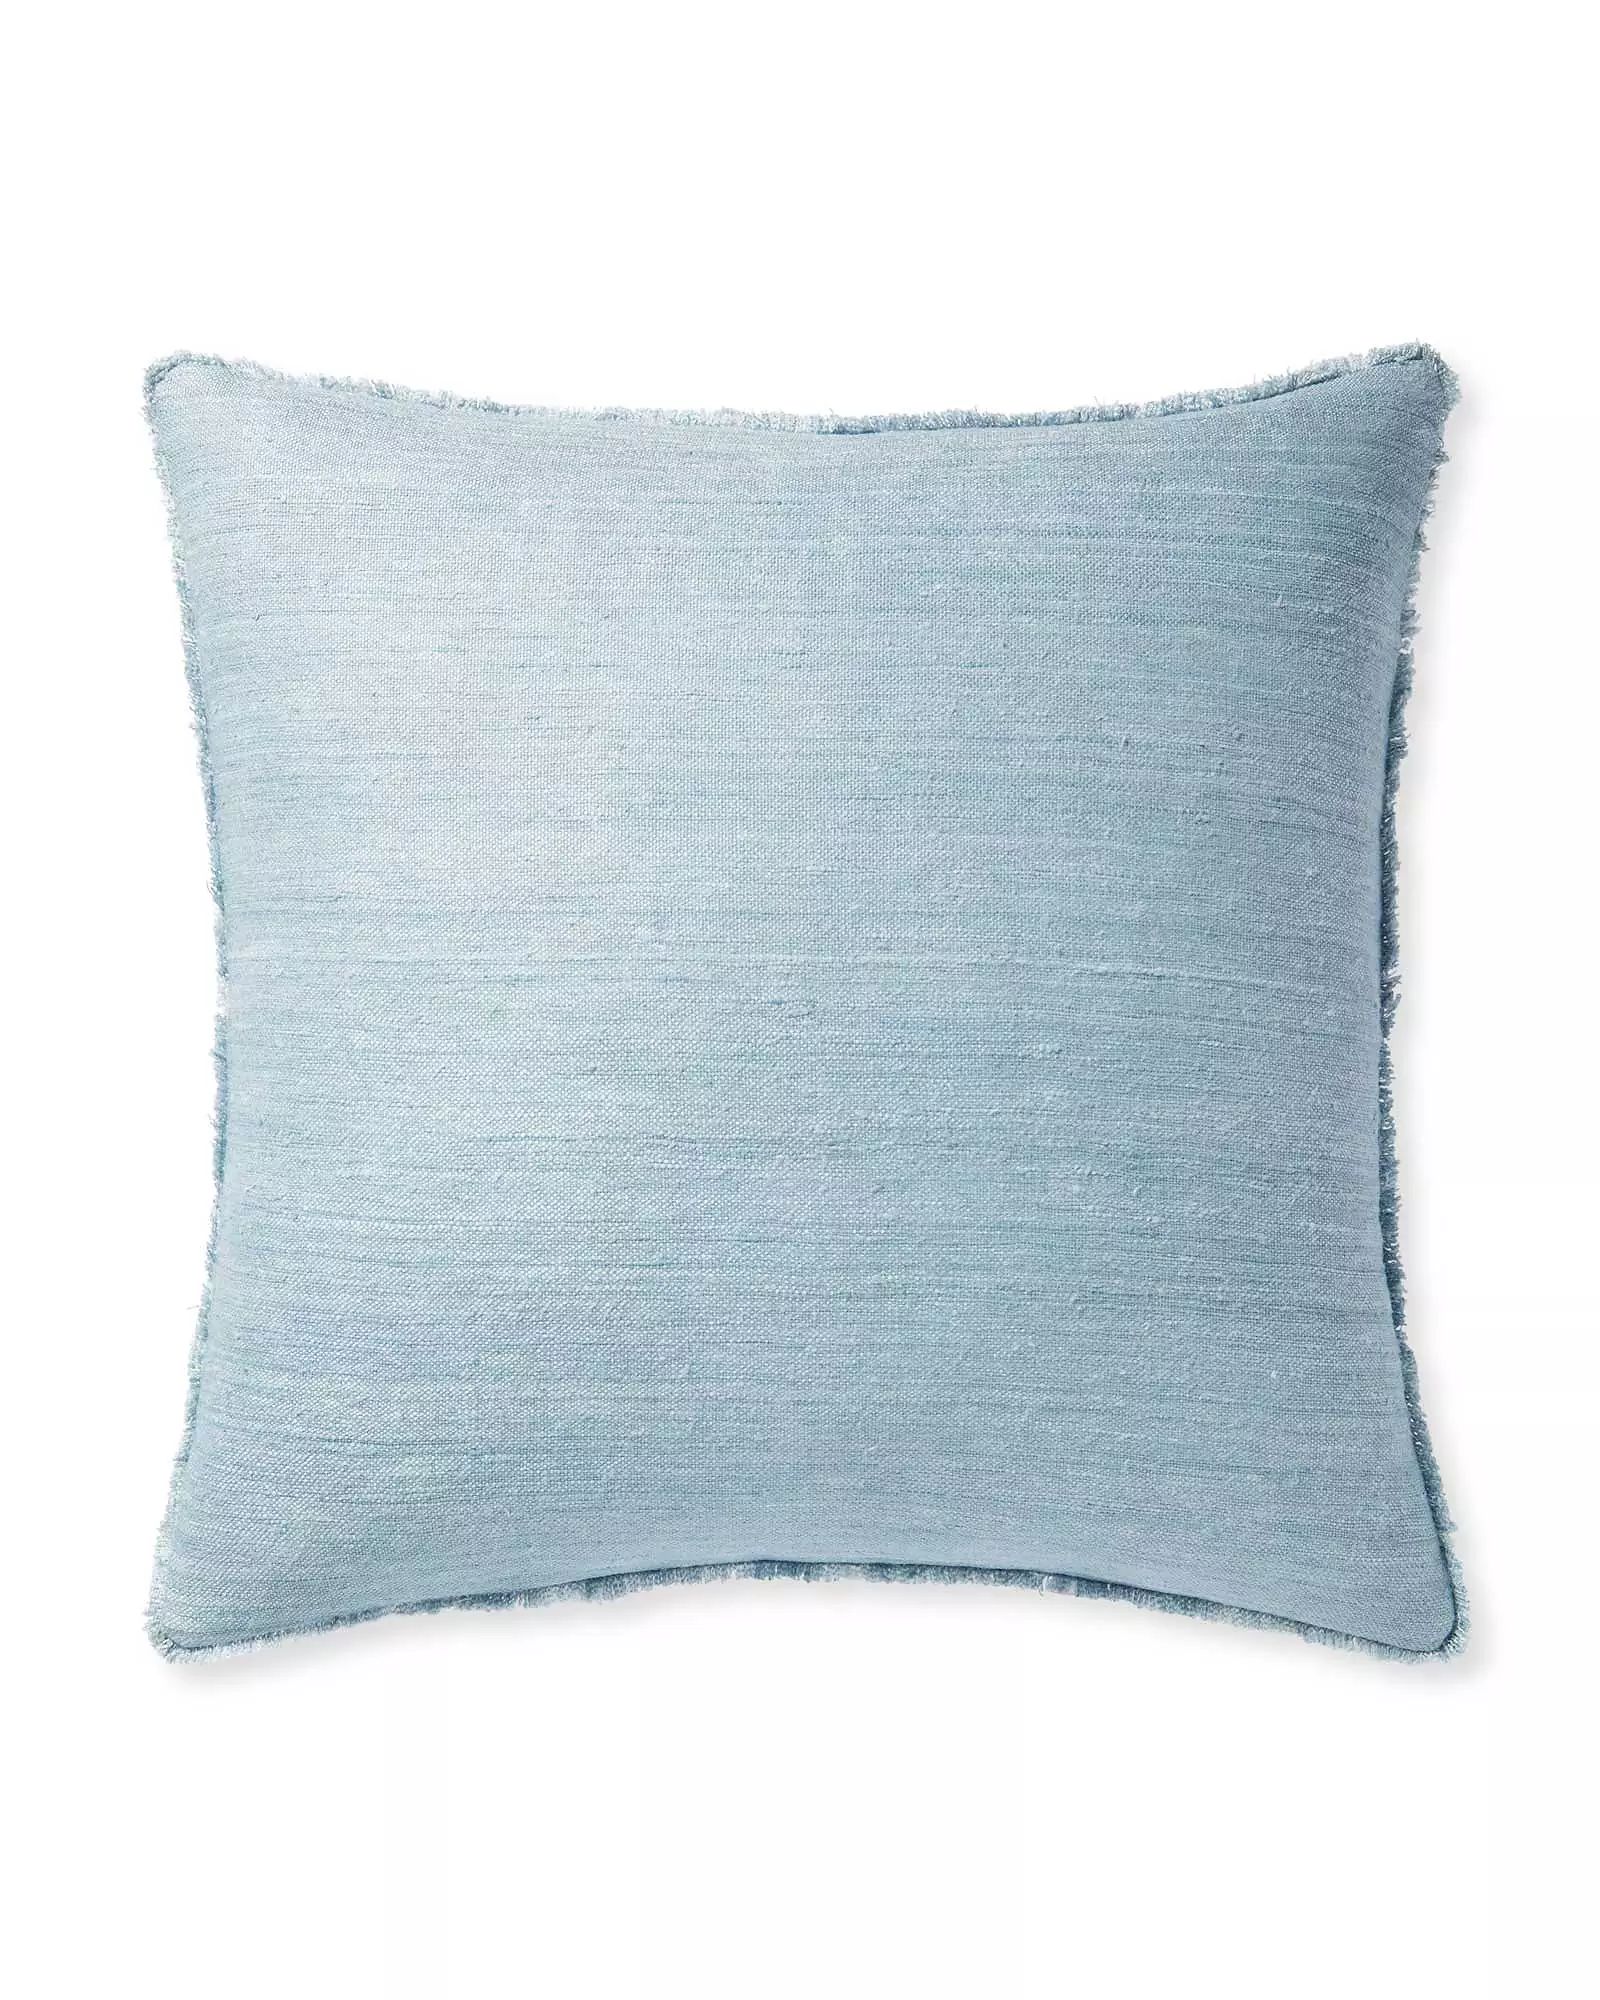 Wiltshire Raw Silk Pillow Cover | Serena and Lily